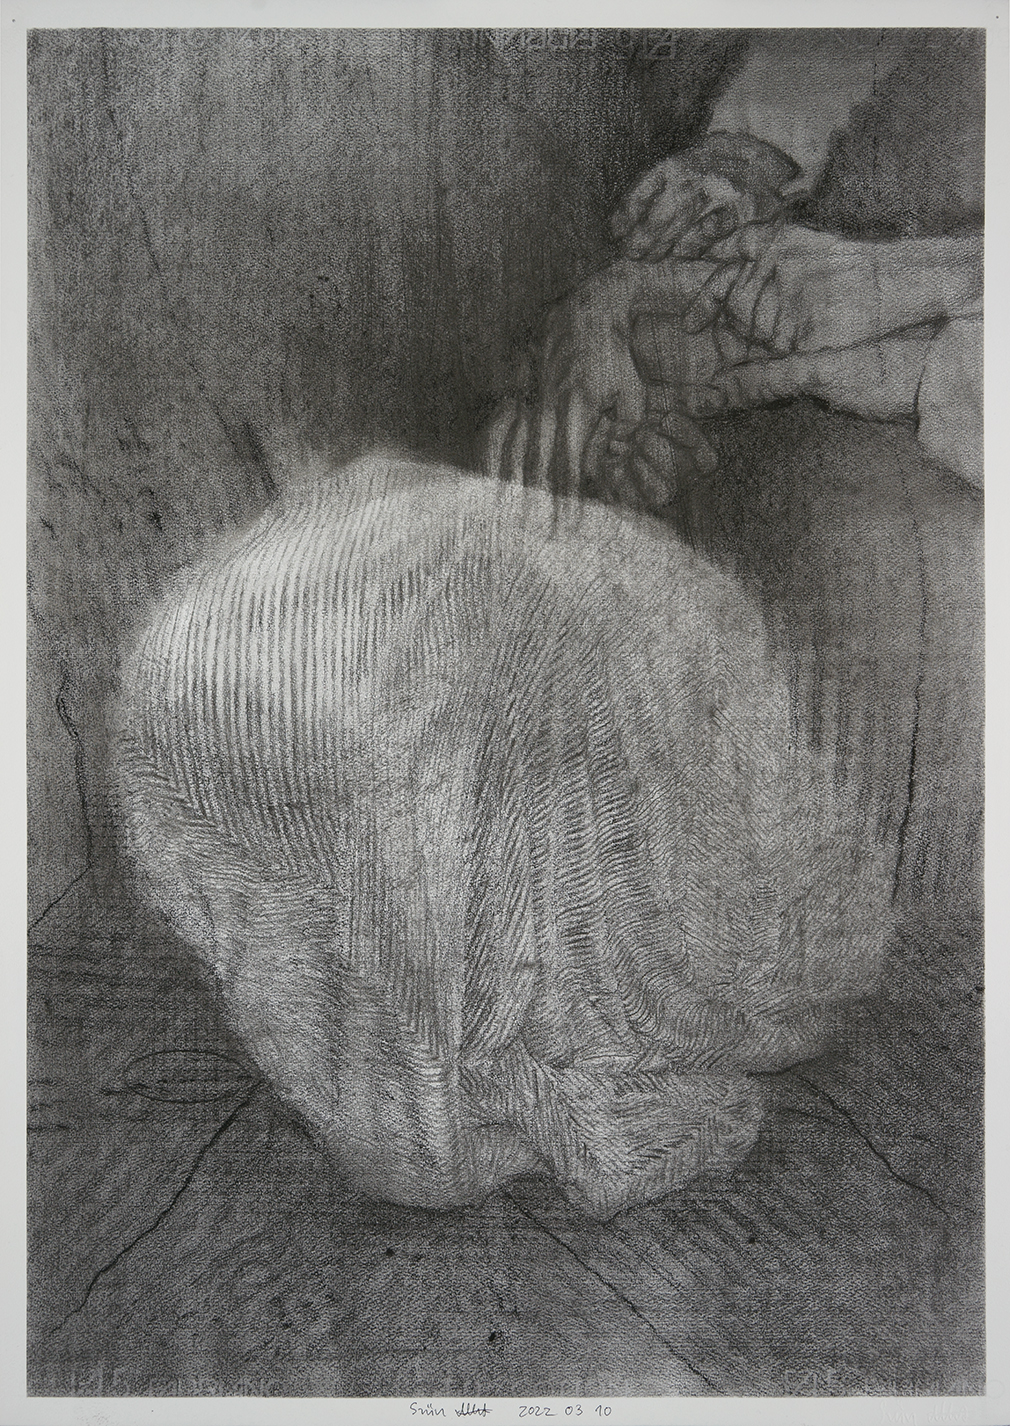 Drawing, charcoal, graphite on paper 70x50cm 2022 03 10